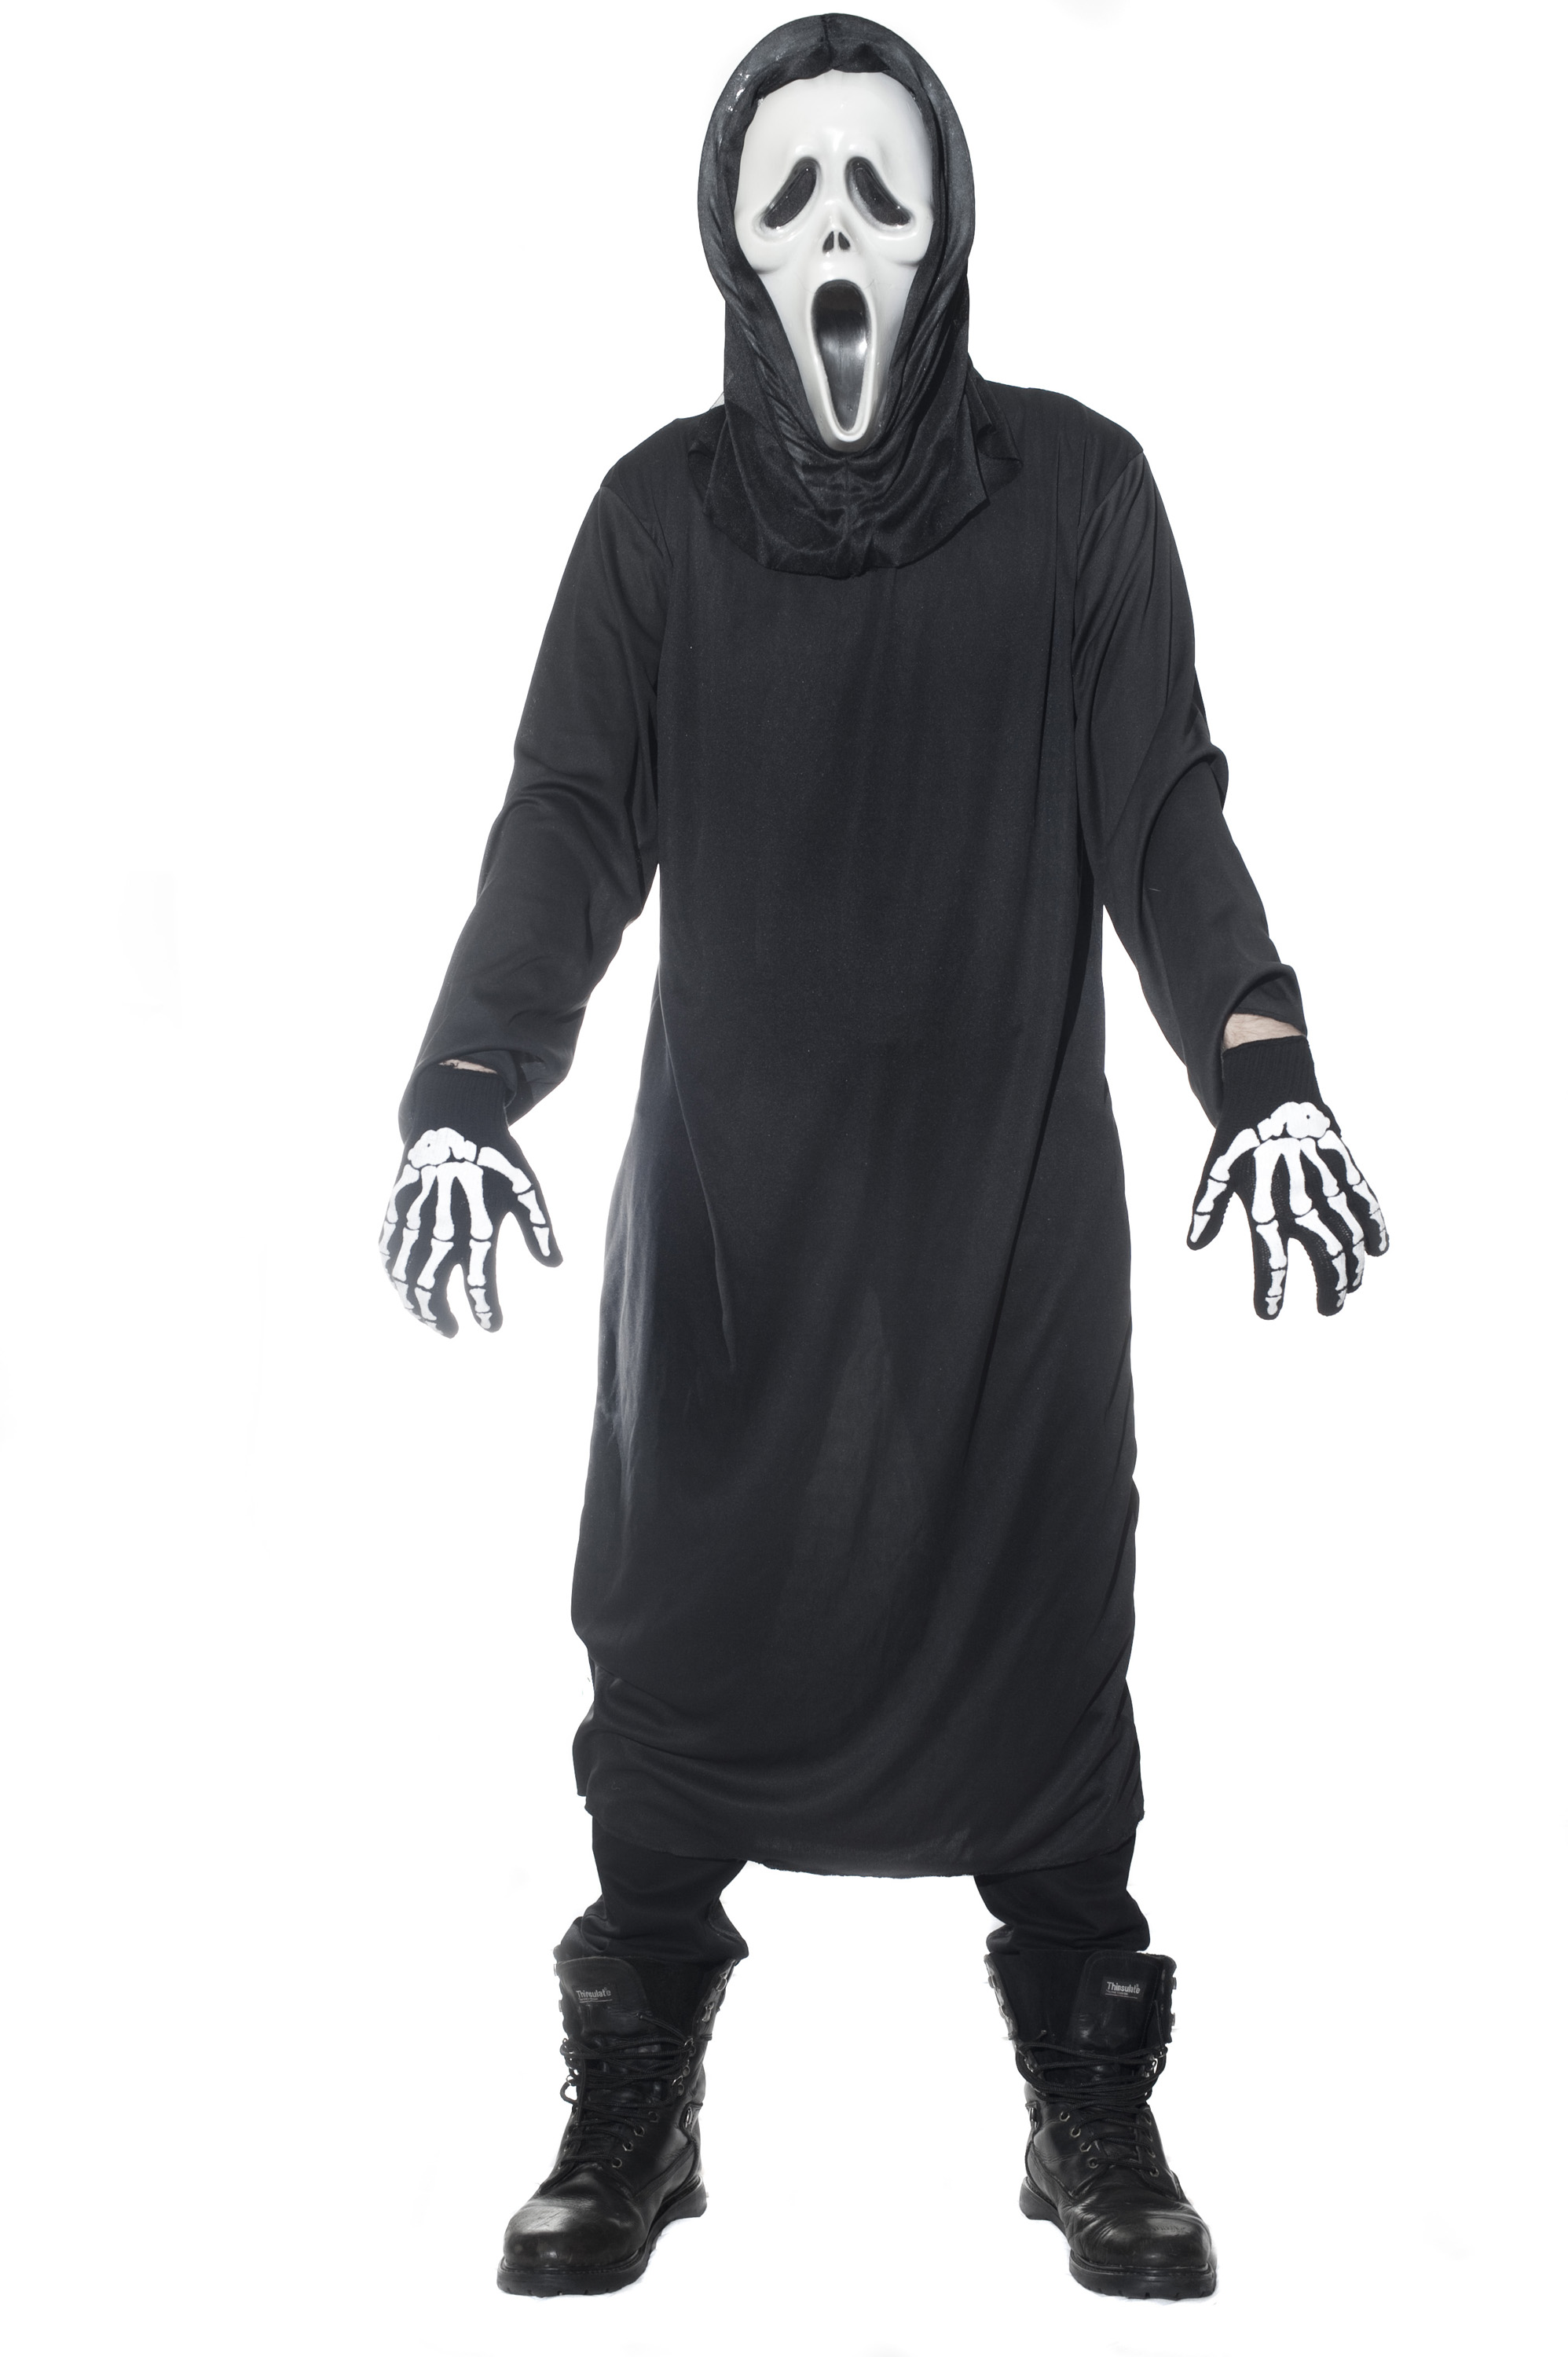 Download stock image 2982-halloween ghost costume. terms of image use. 